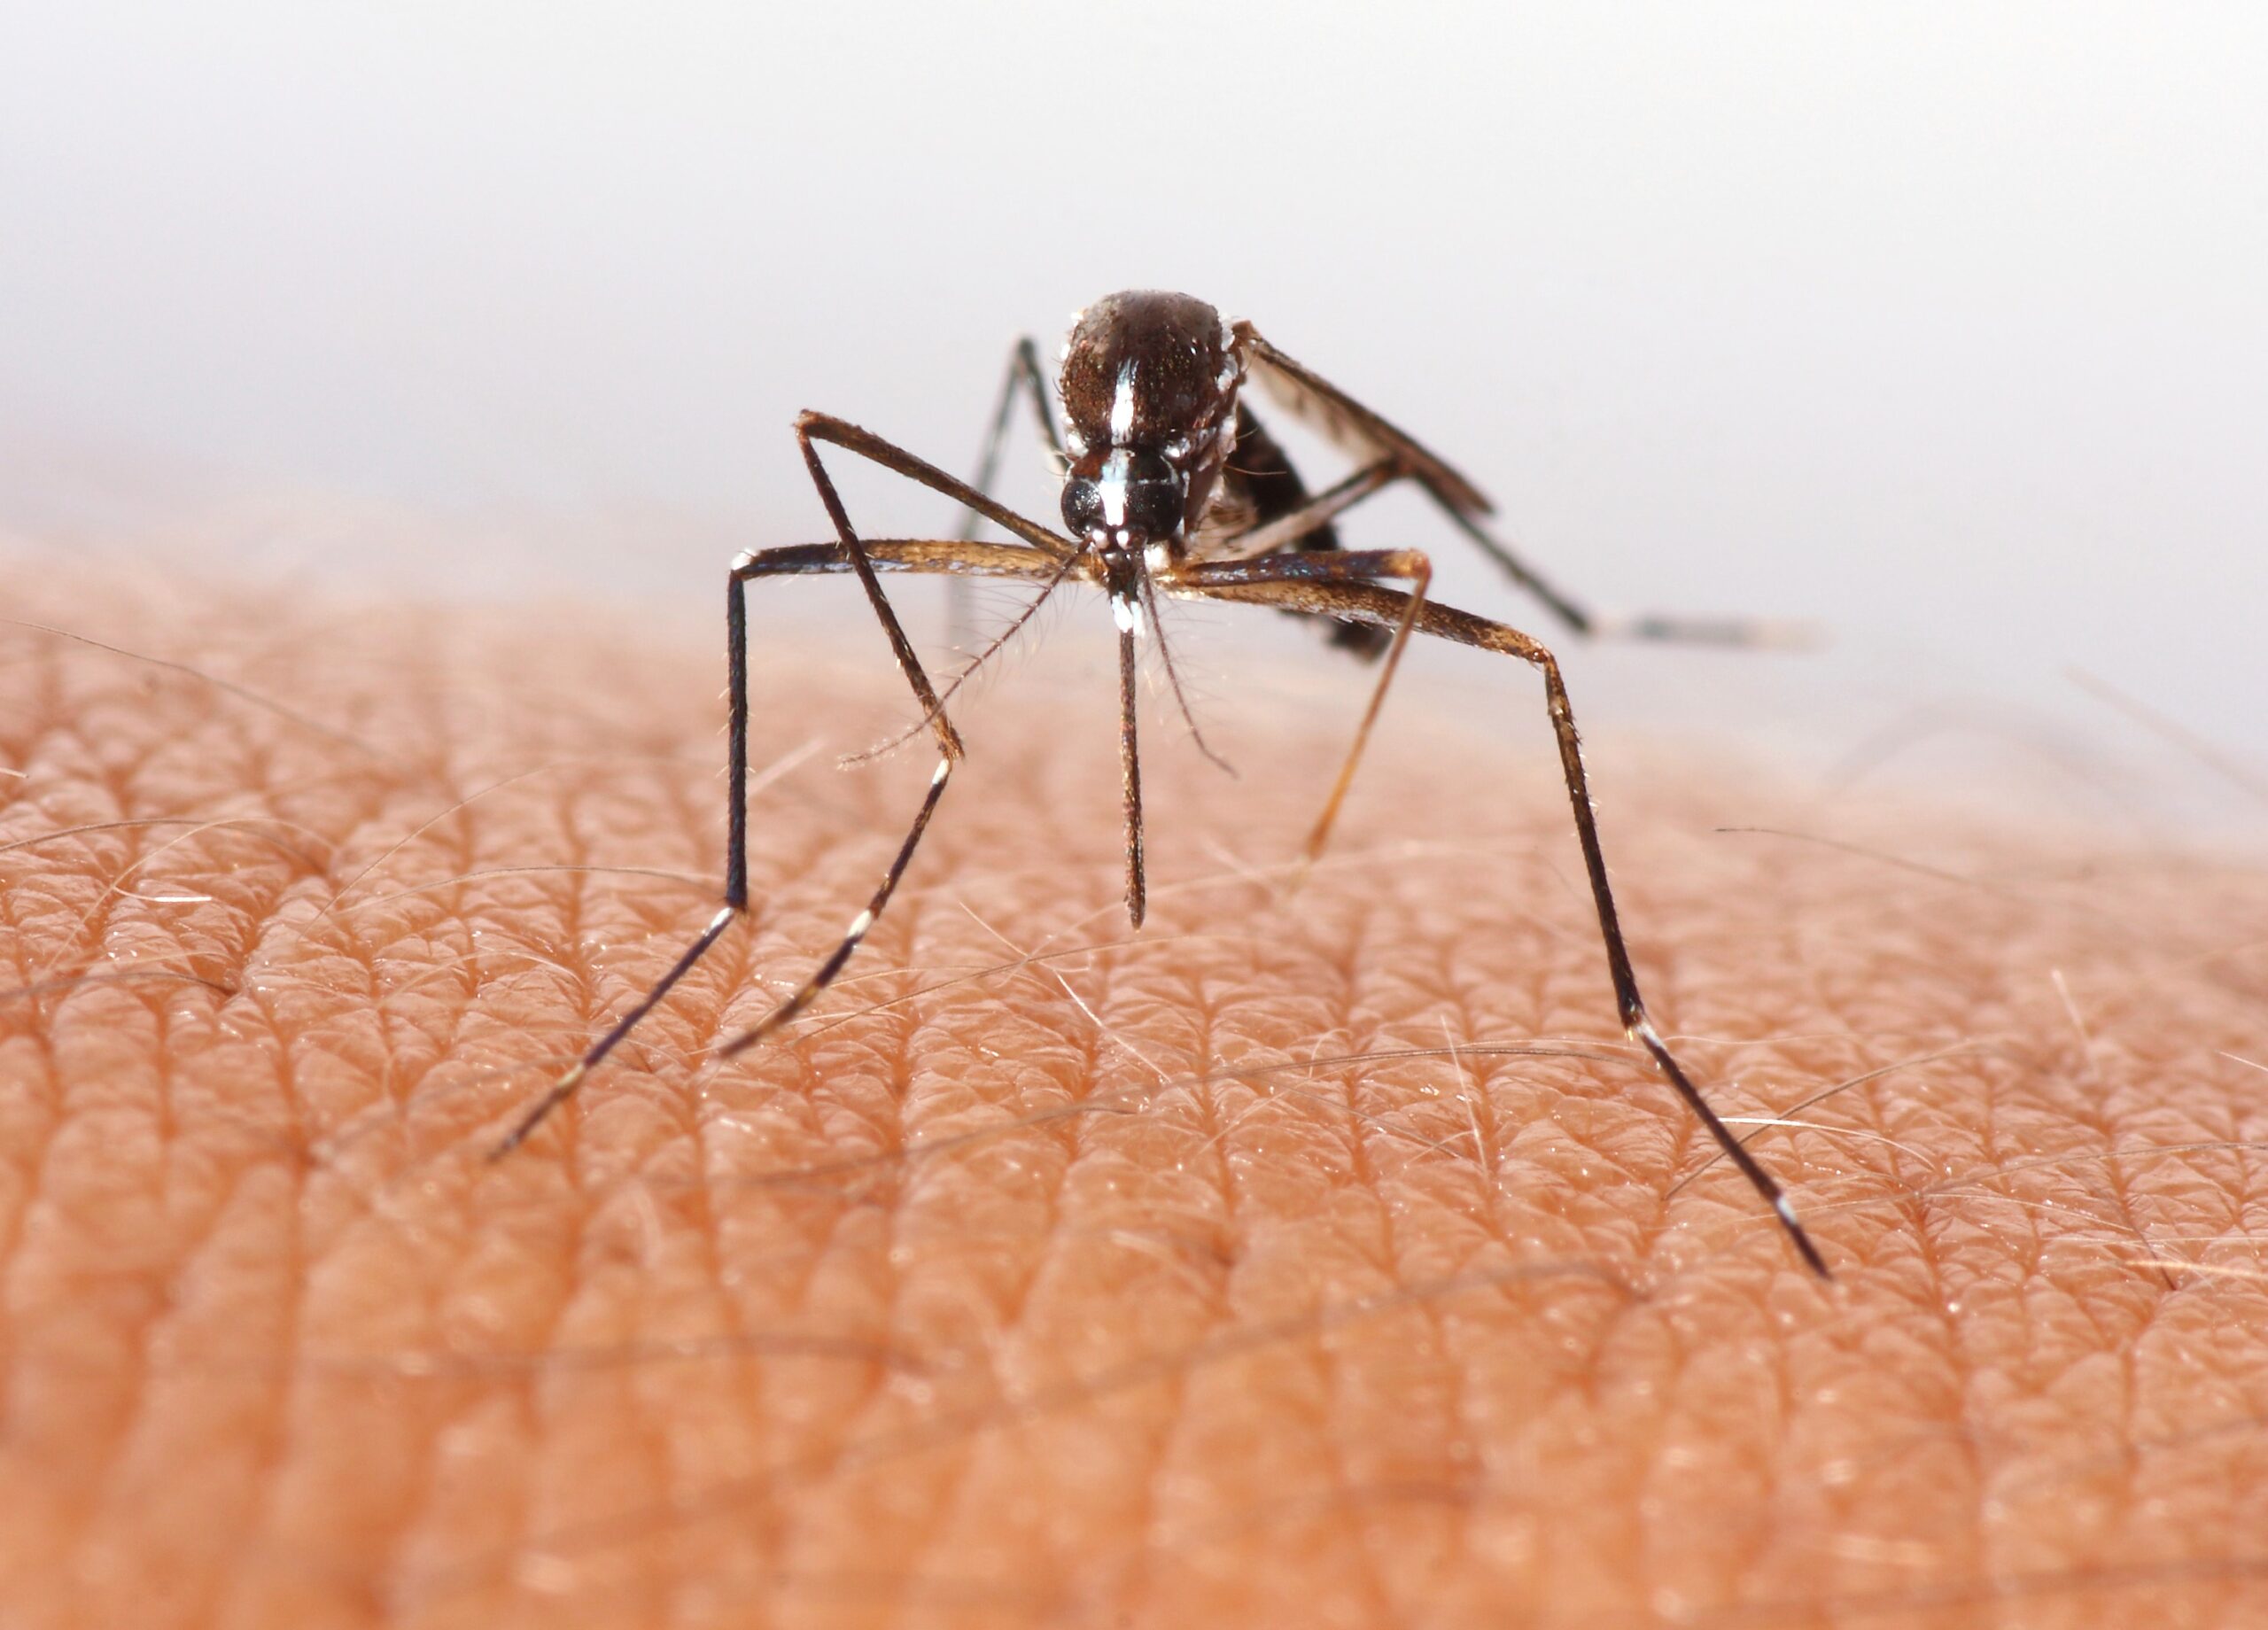 How To Bite a Mosquito Back – The Best Way to Stop Annoying Pests!